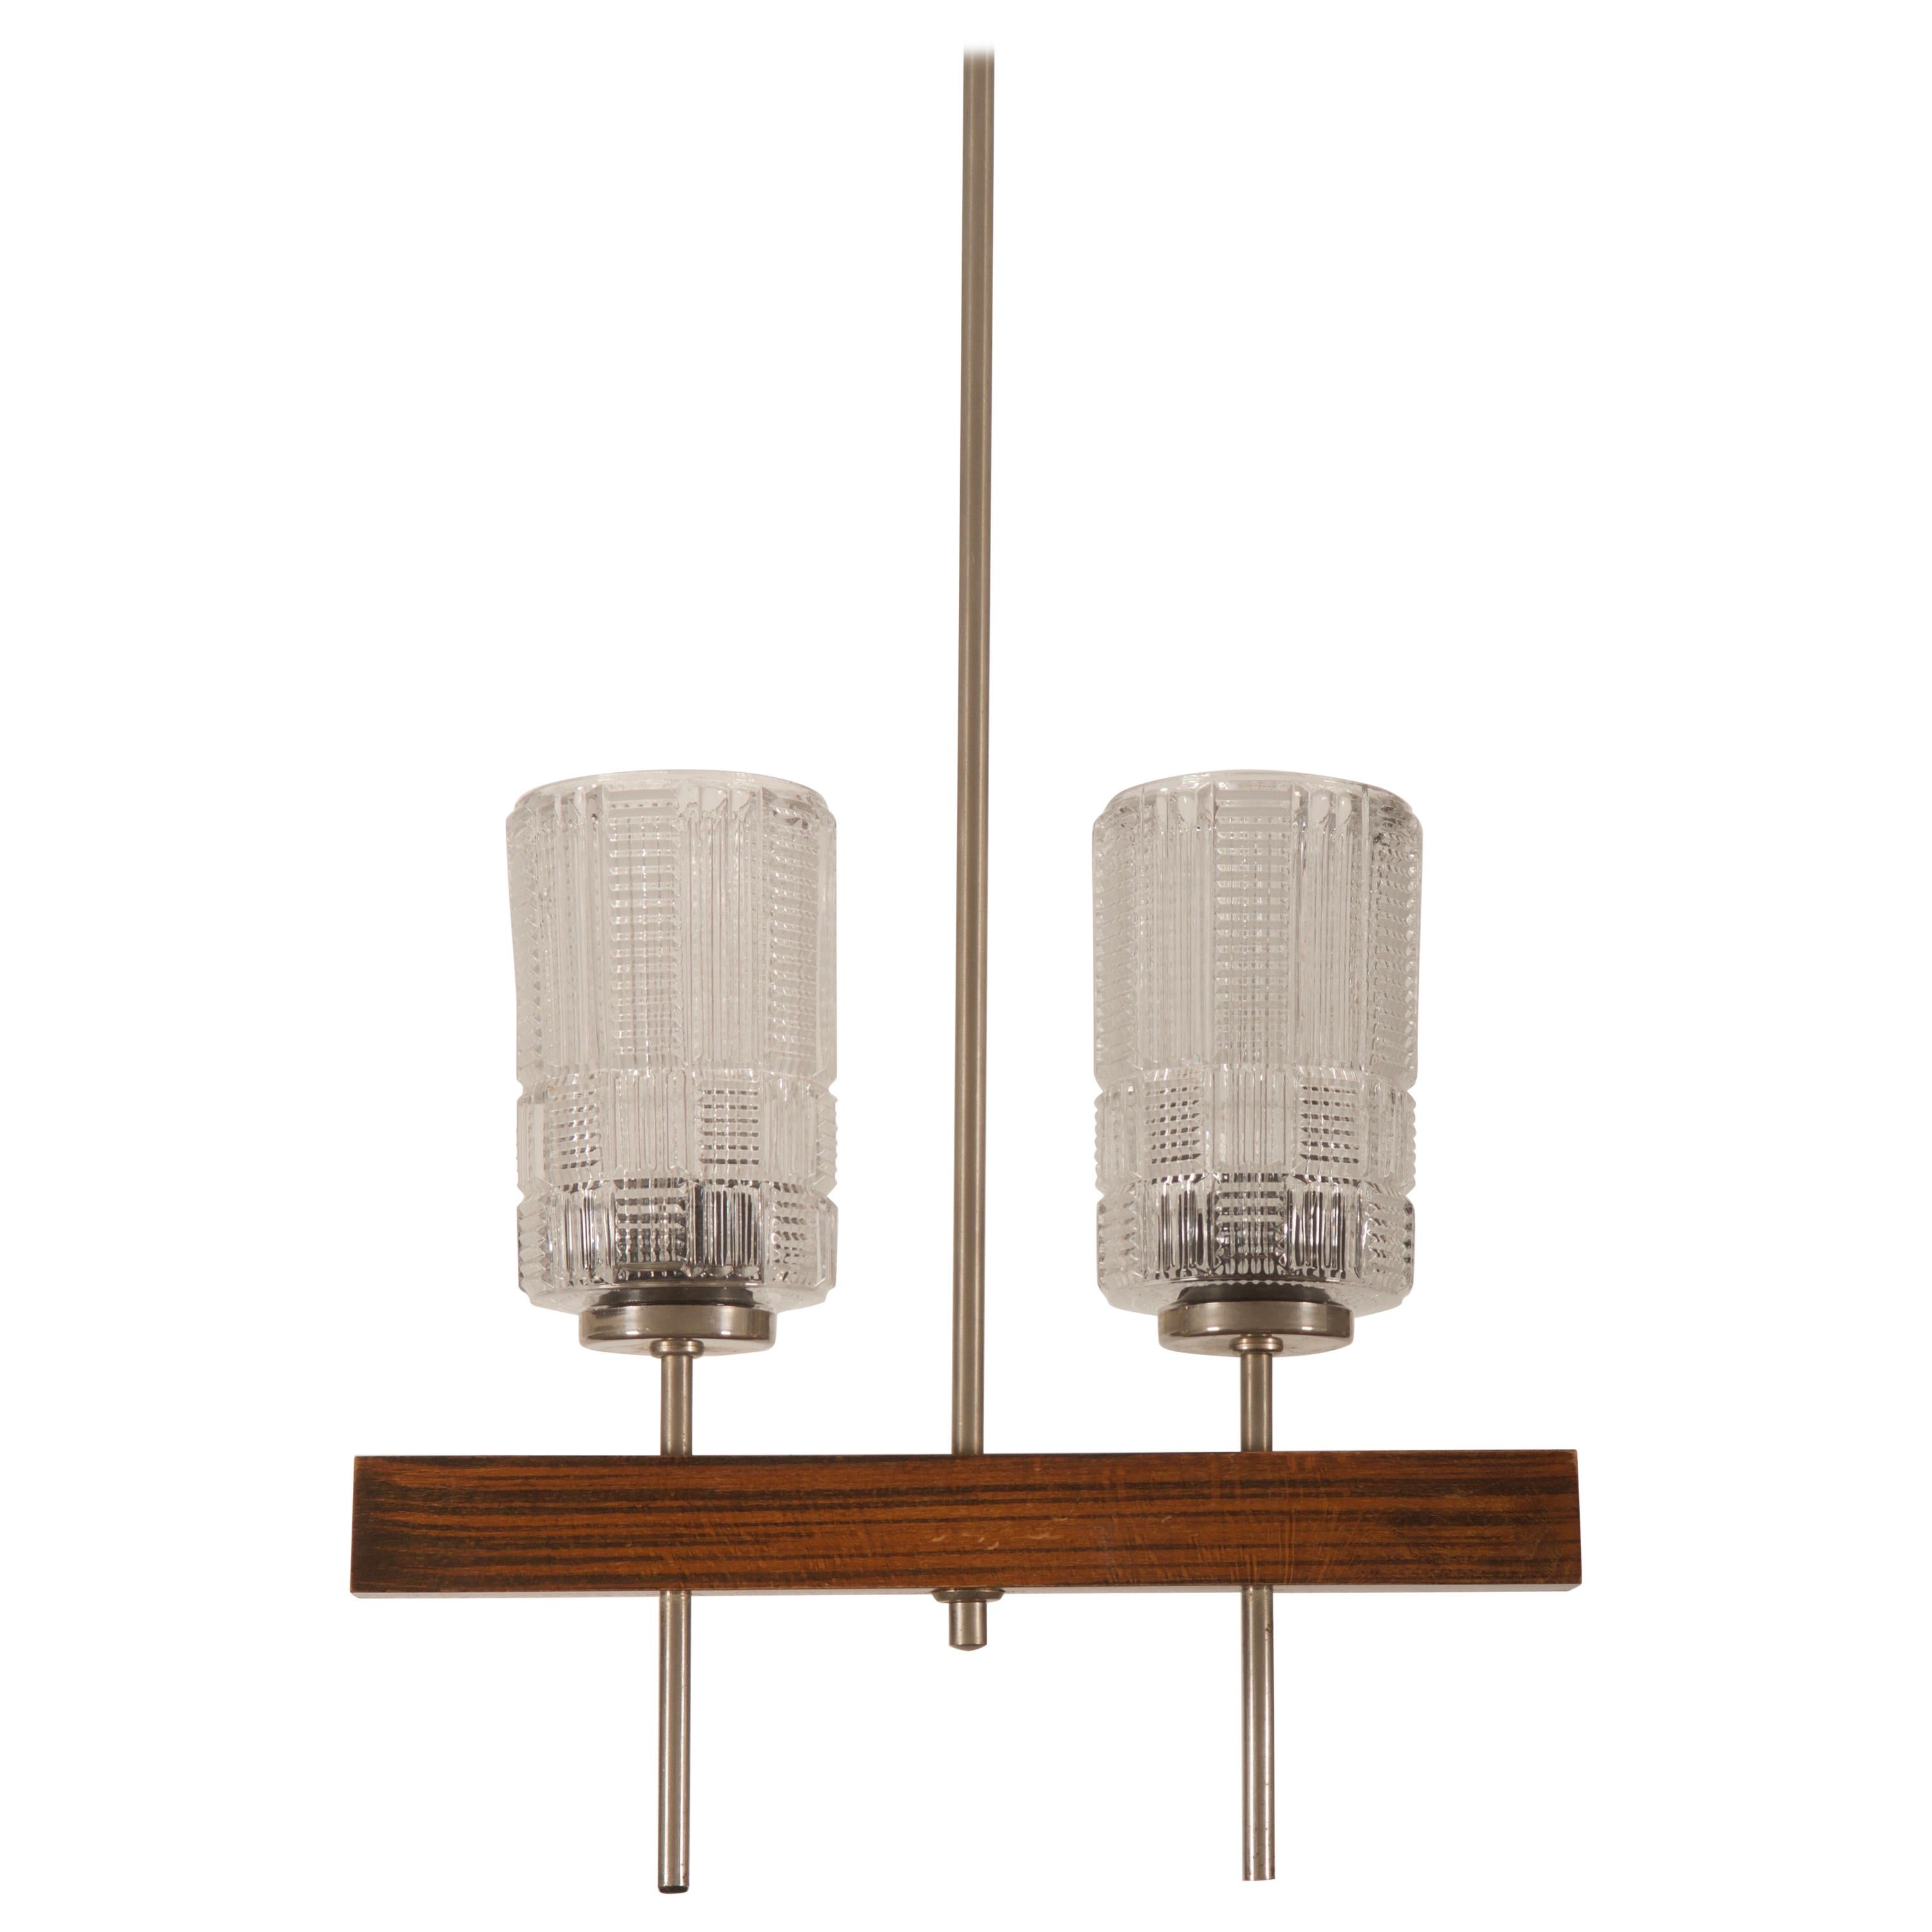 Midcentury Danish Chandelier with Glass Shades